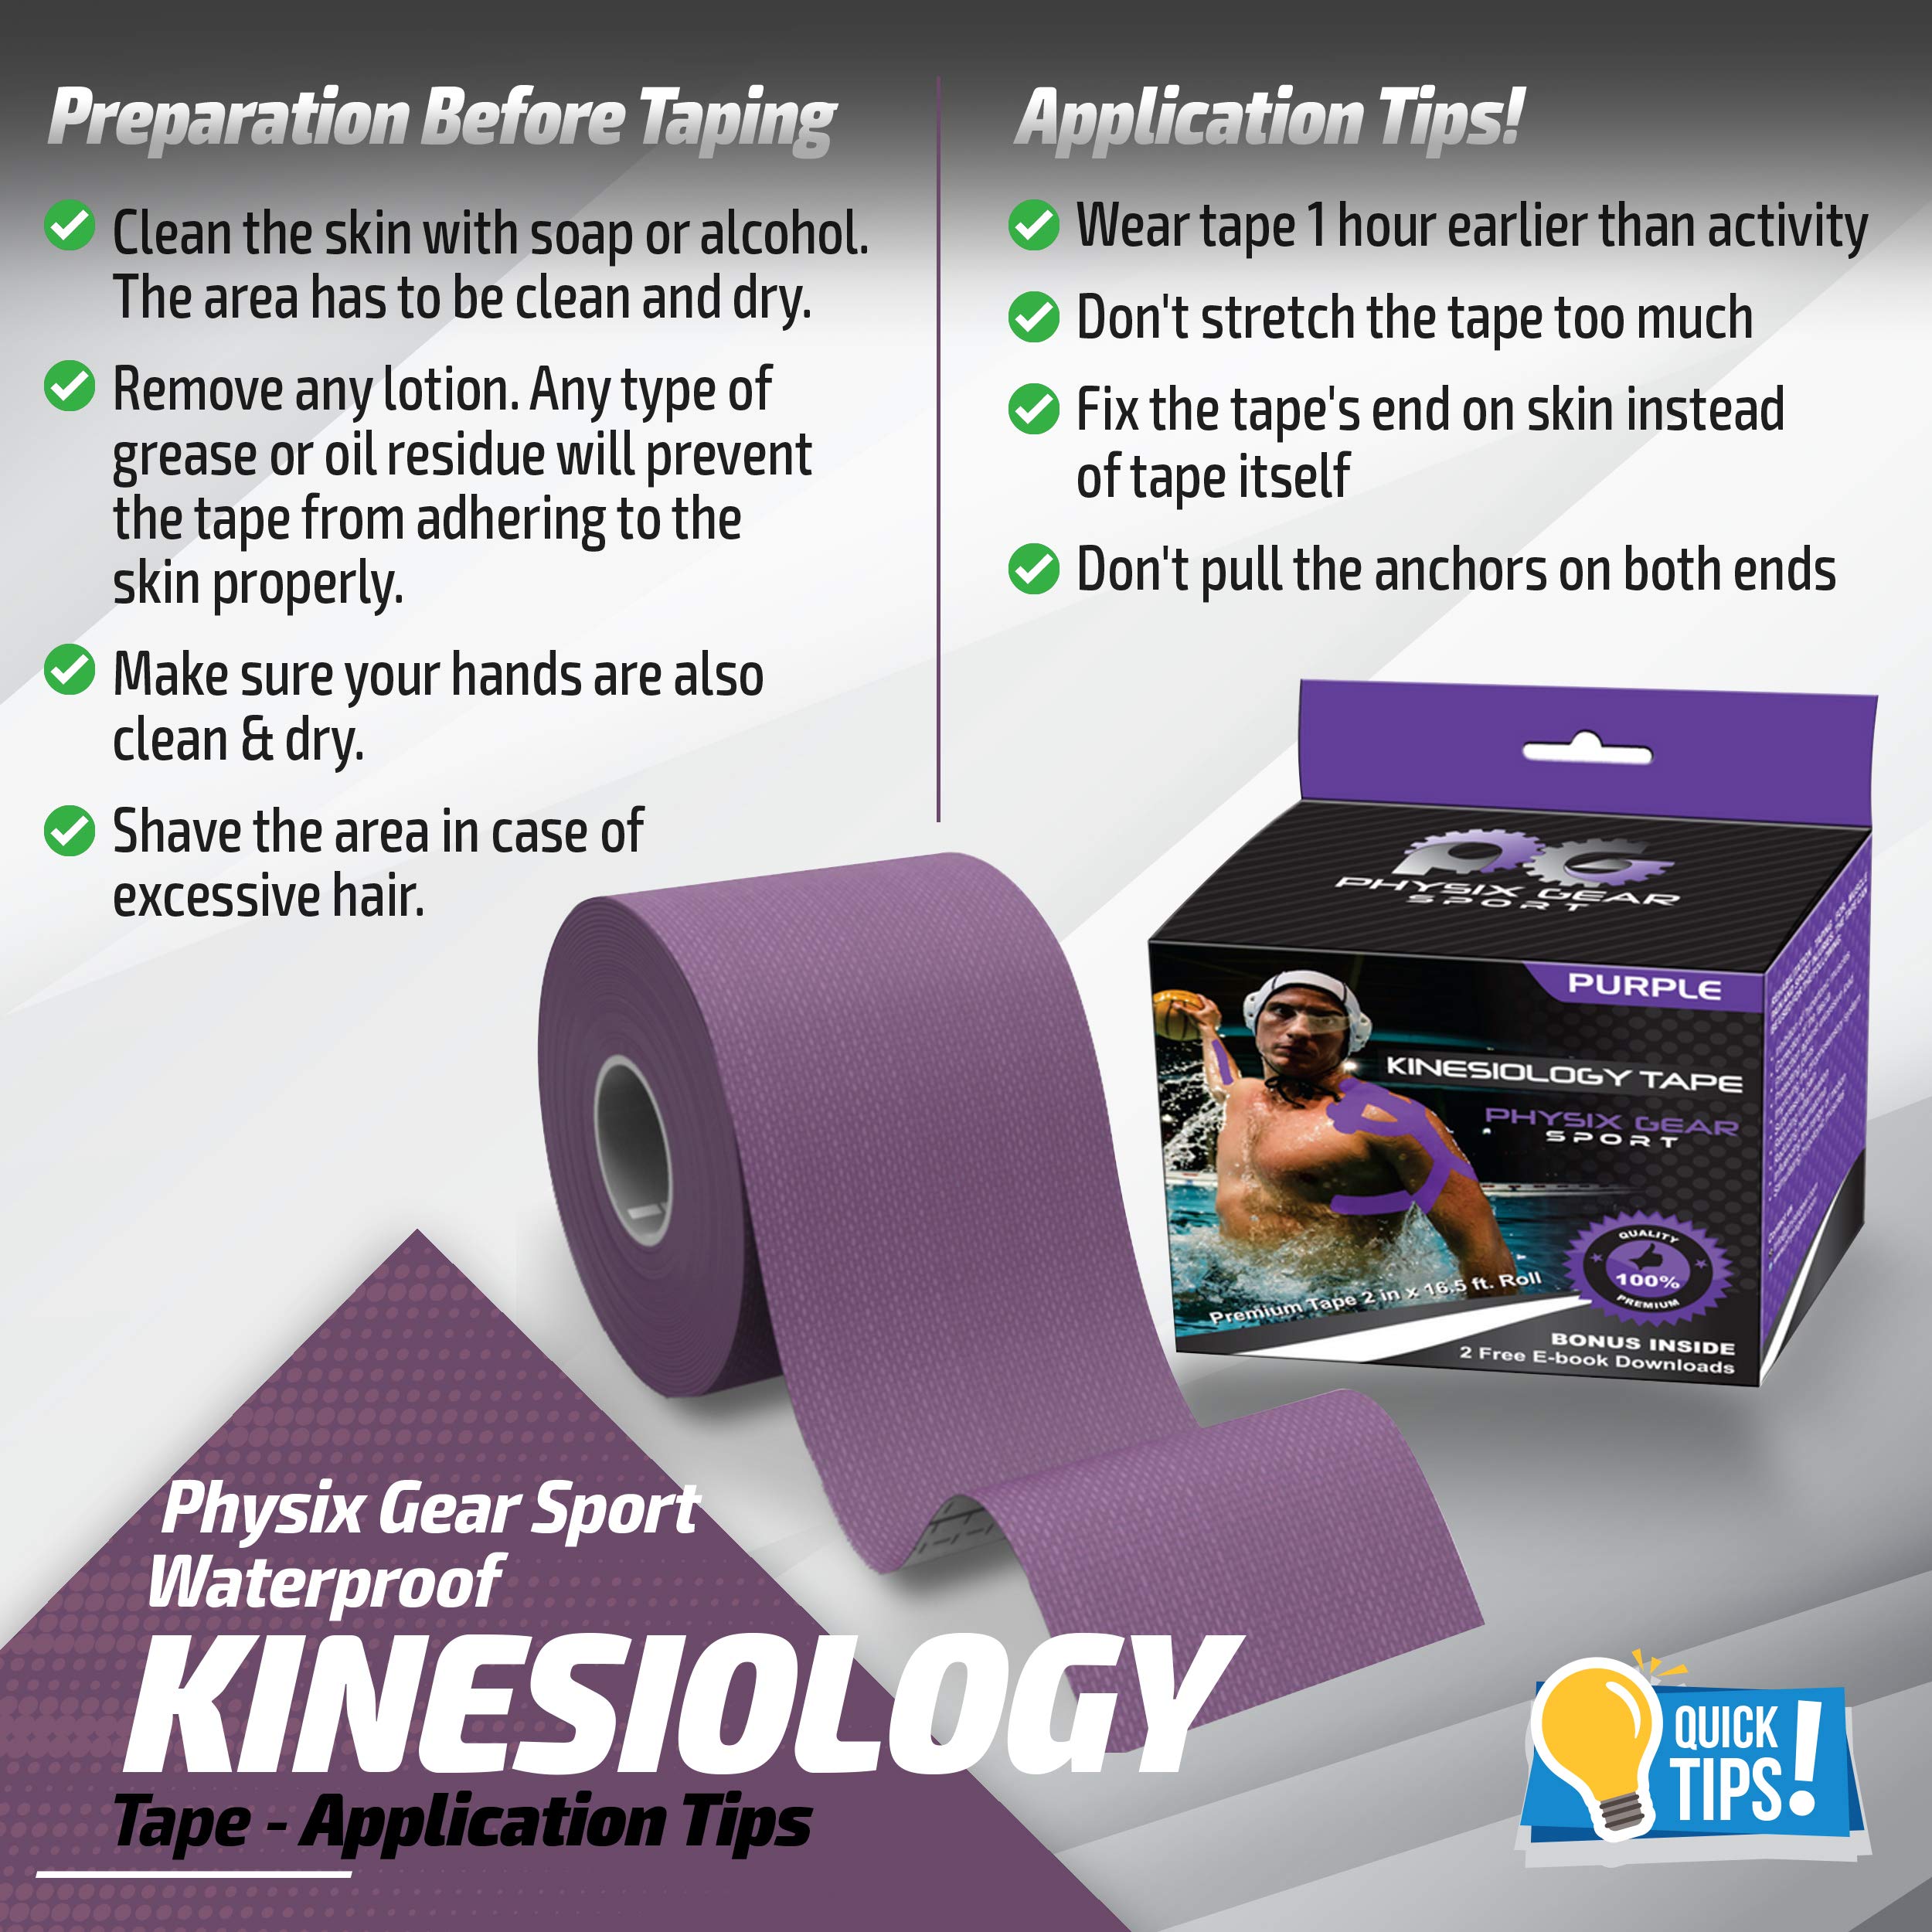 Physix Gear Sport Kinesiology Tape (2 Pack or 1 Pack), Best Waterproof Muscle Support Adhesive, 2in x 16.4ft Roll Uncut, Physio Therapeutic Aid for Injury Recovery